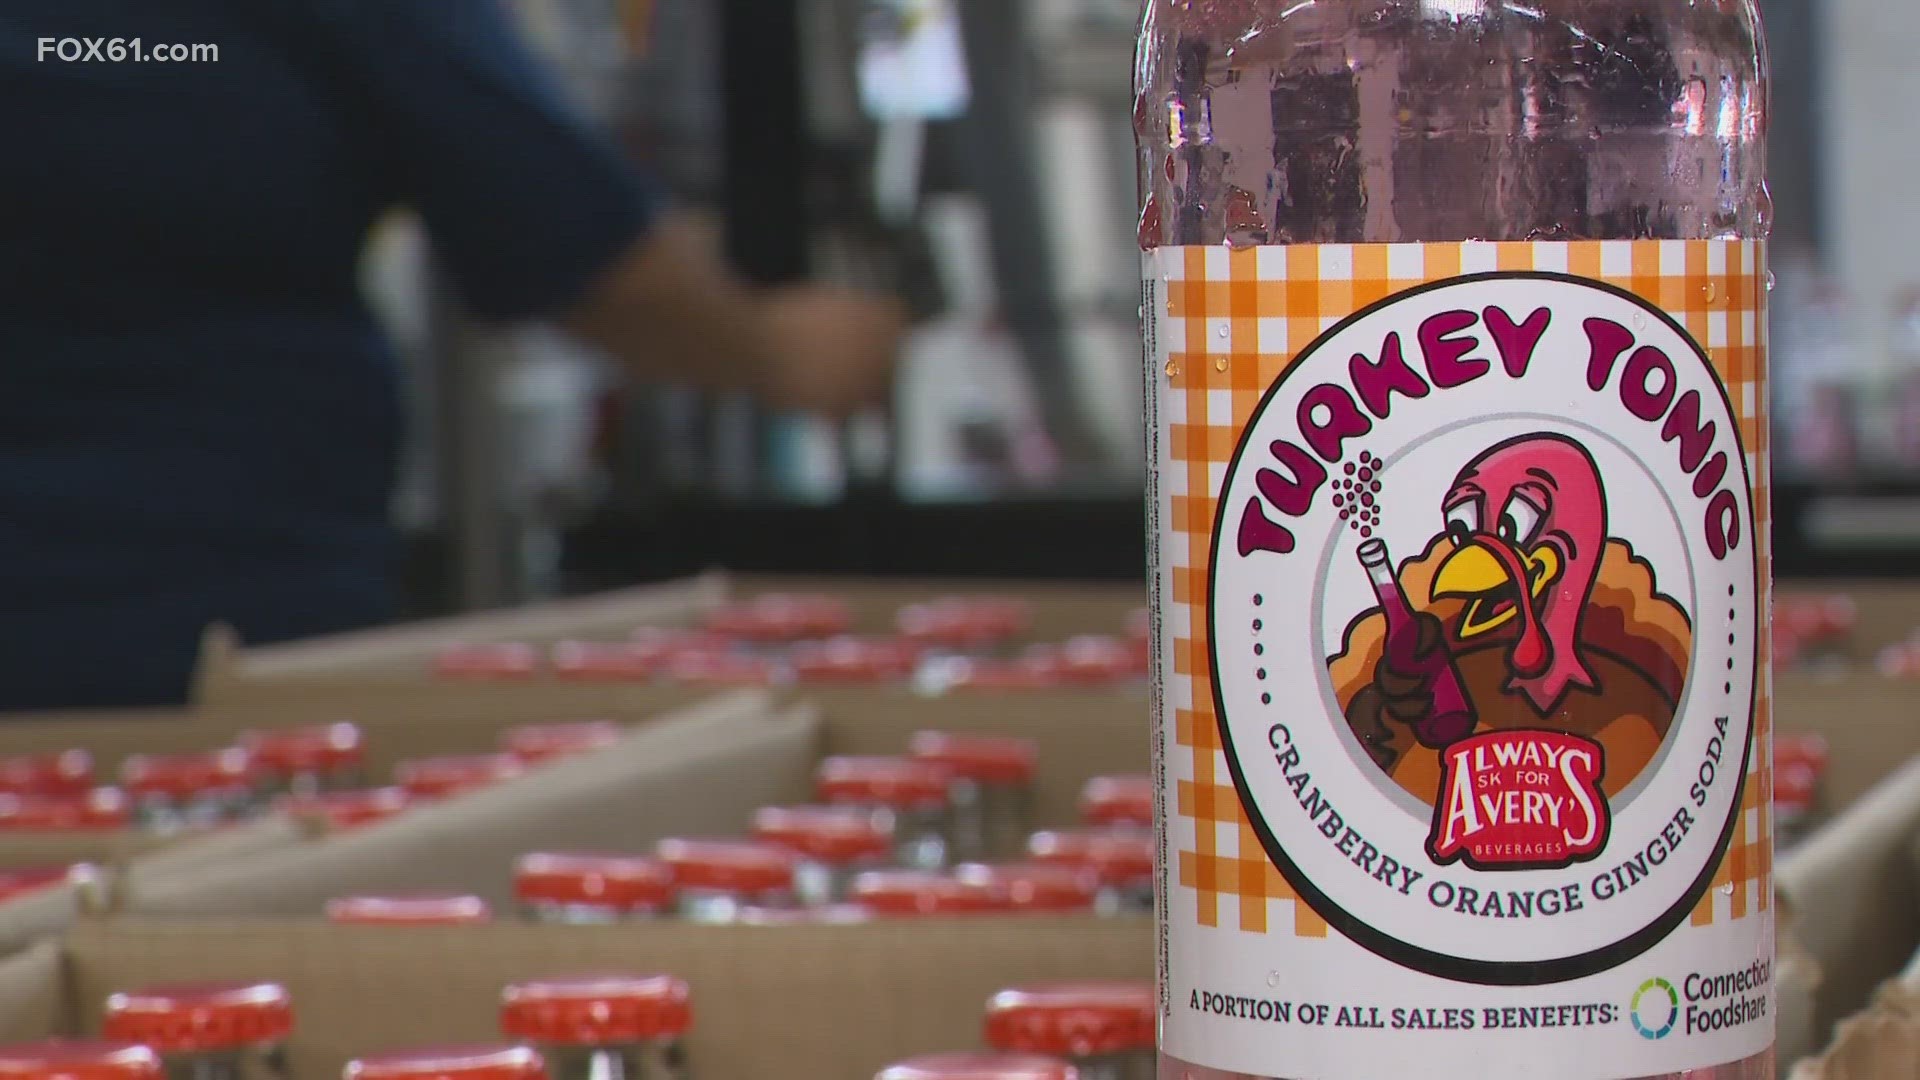 The “Turkey Tonic” is back for a third year in a row at Avery’s Soda.